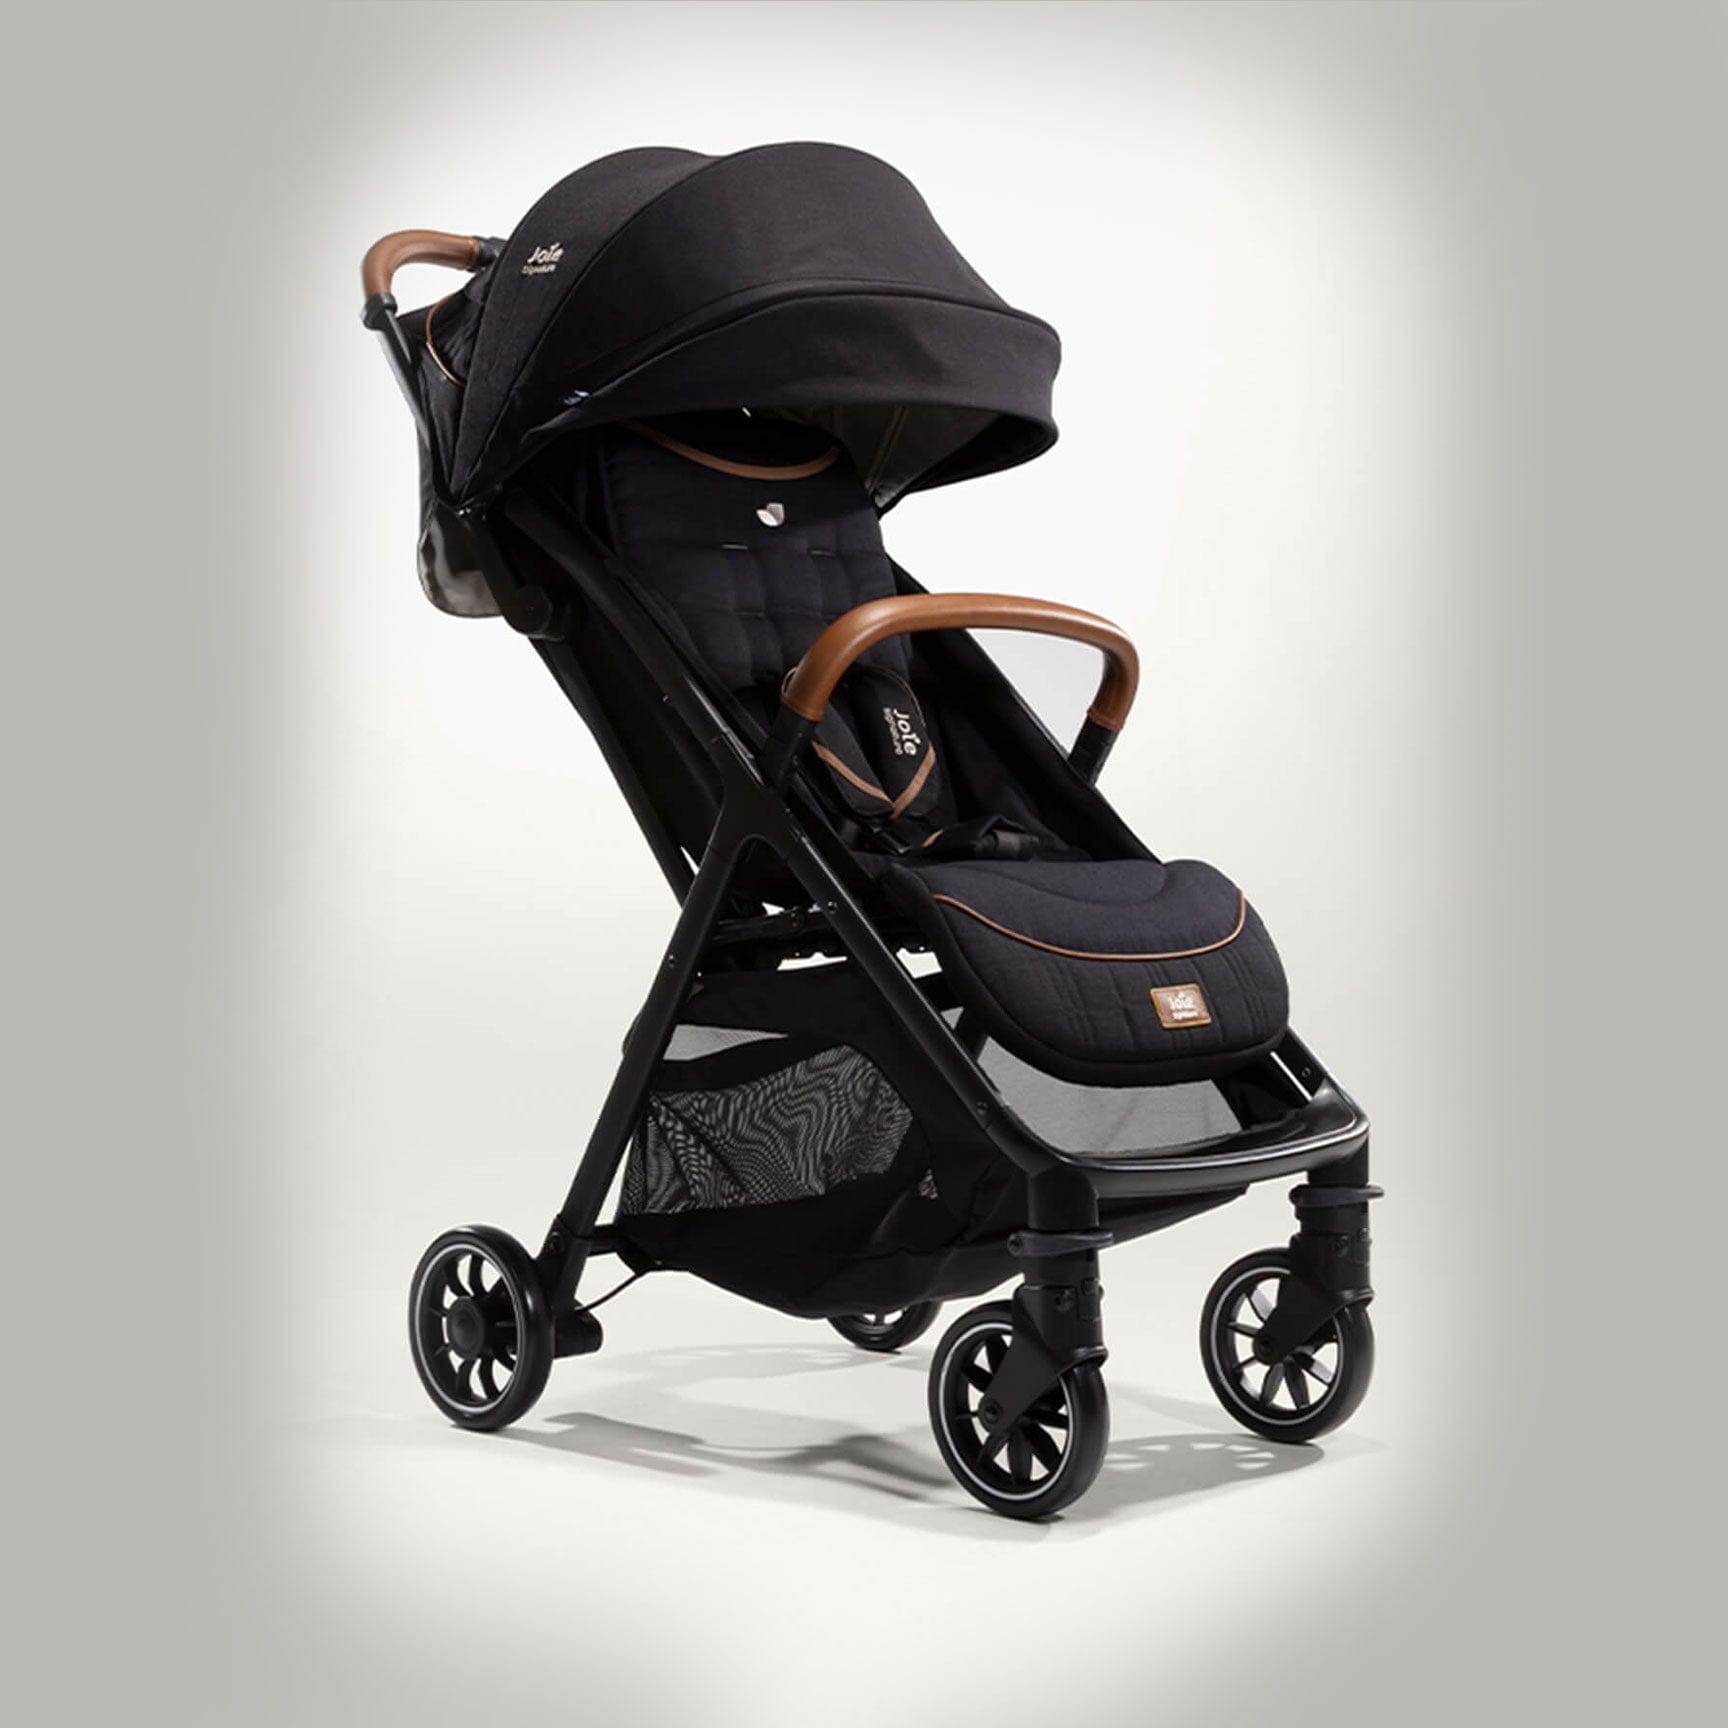 Joie Pushchairs & Buggies Joie Parcel Signature Stroller - Eclipse S2112AAECL000